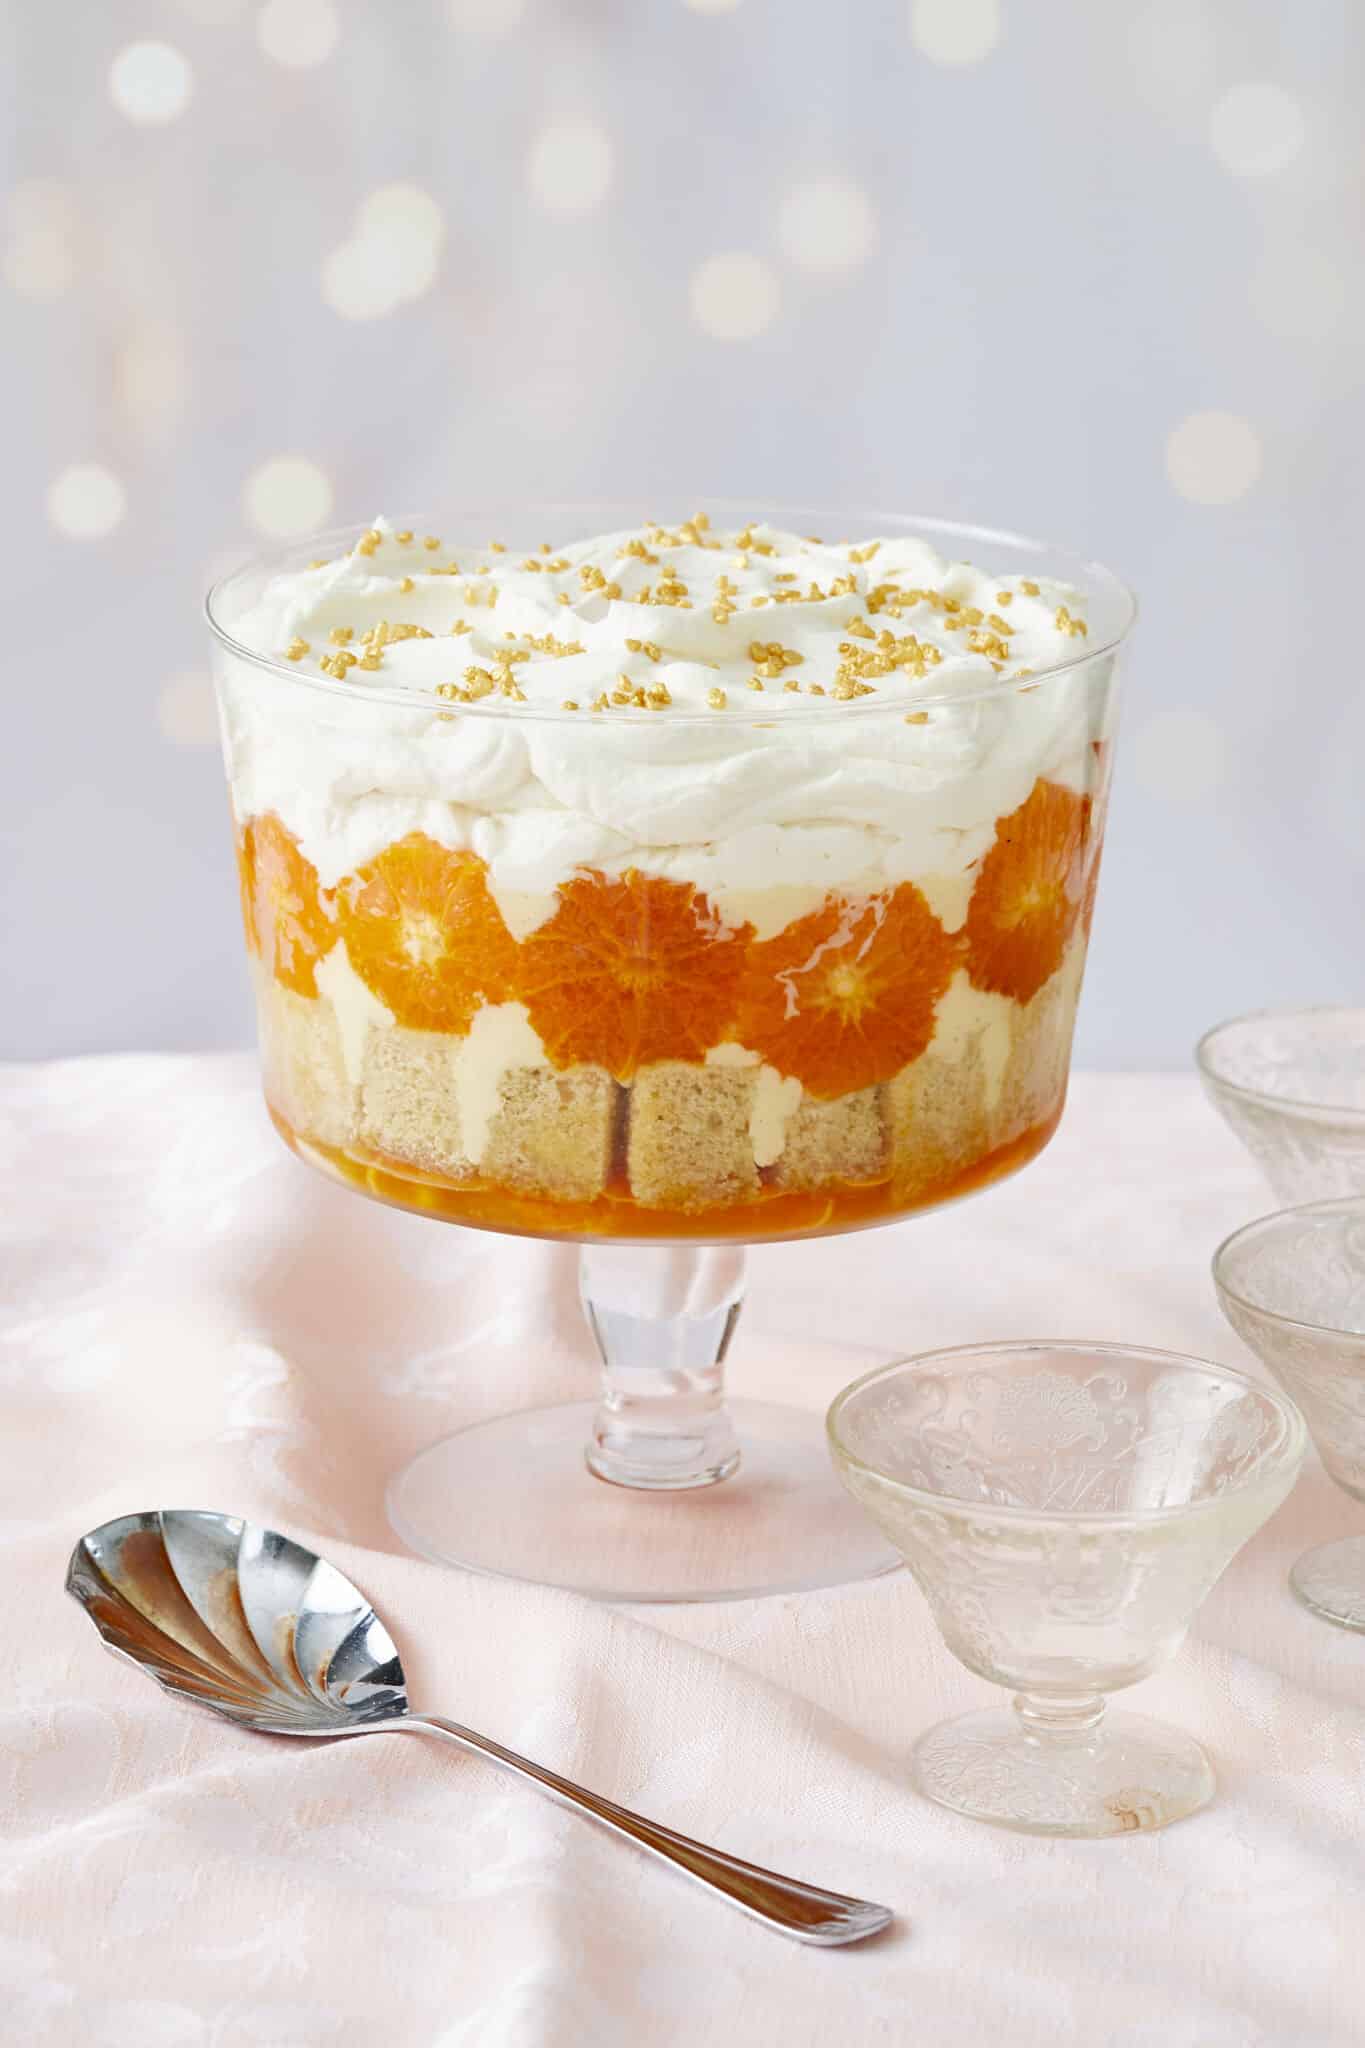 A stunning Sweet and Zesty Clementine Trifle with Boozy Amaretto consists of layers of clementine syrup, cubed sponge cake, caramelized clementines, crème anglaise, lemon curd, and Amaretto whipped cream. Three glass dessert cups and one serving spoon are on the side. 